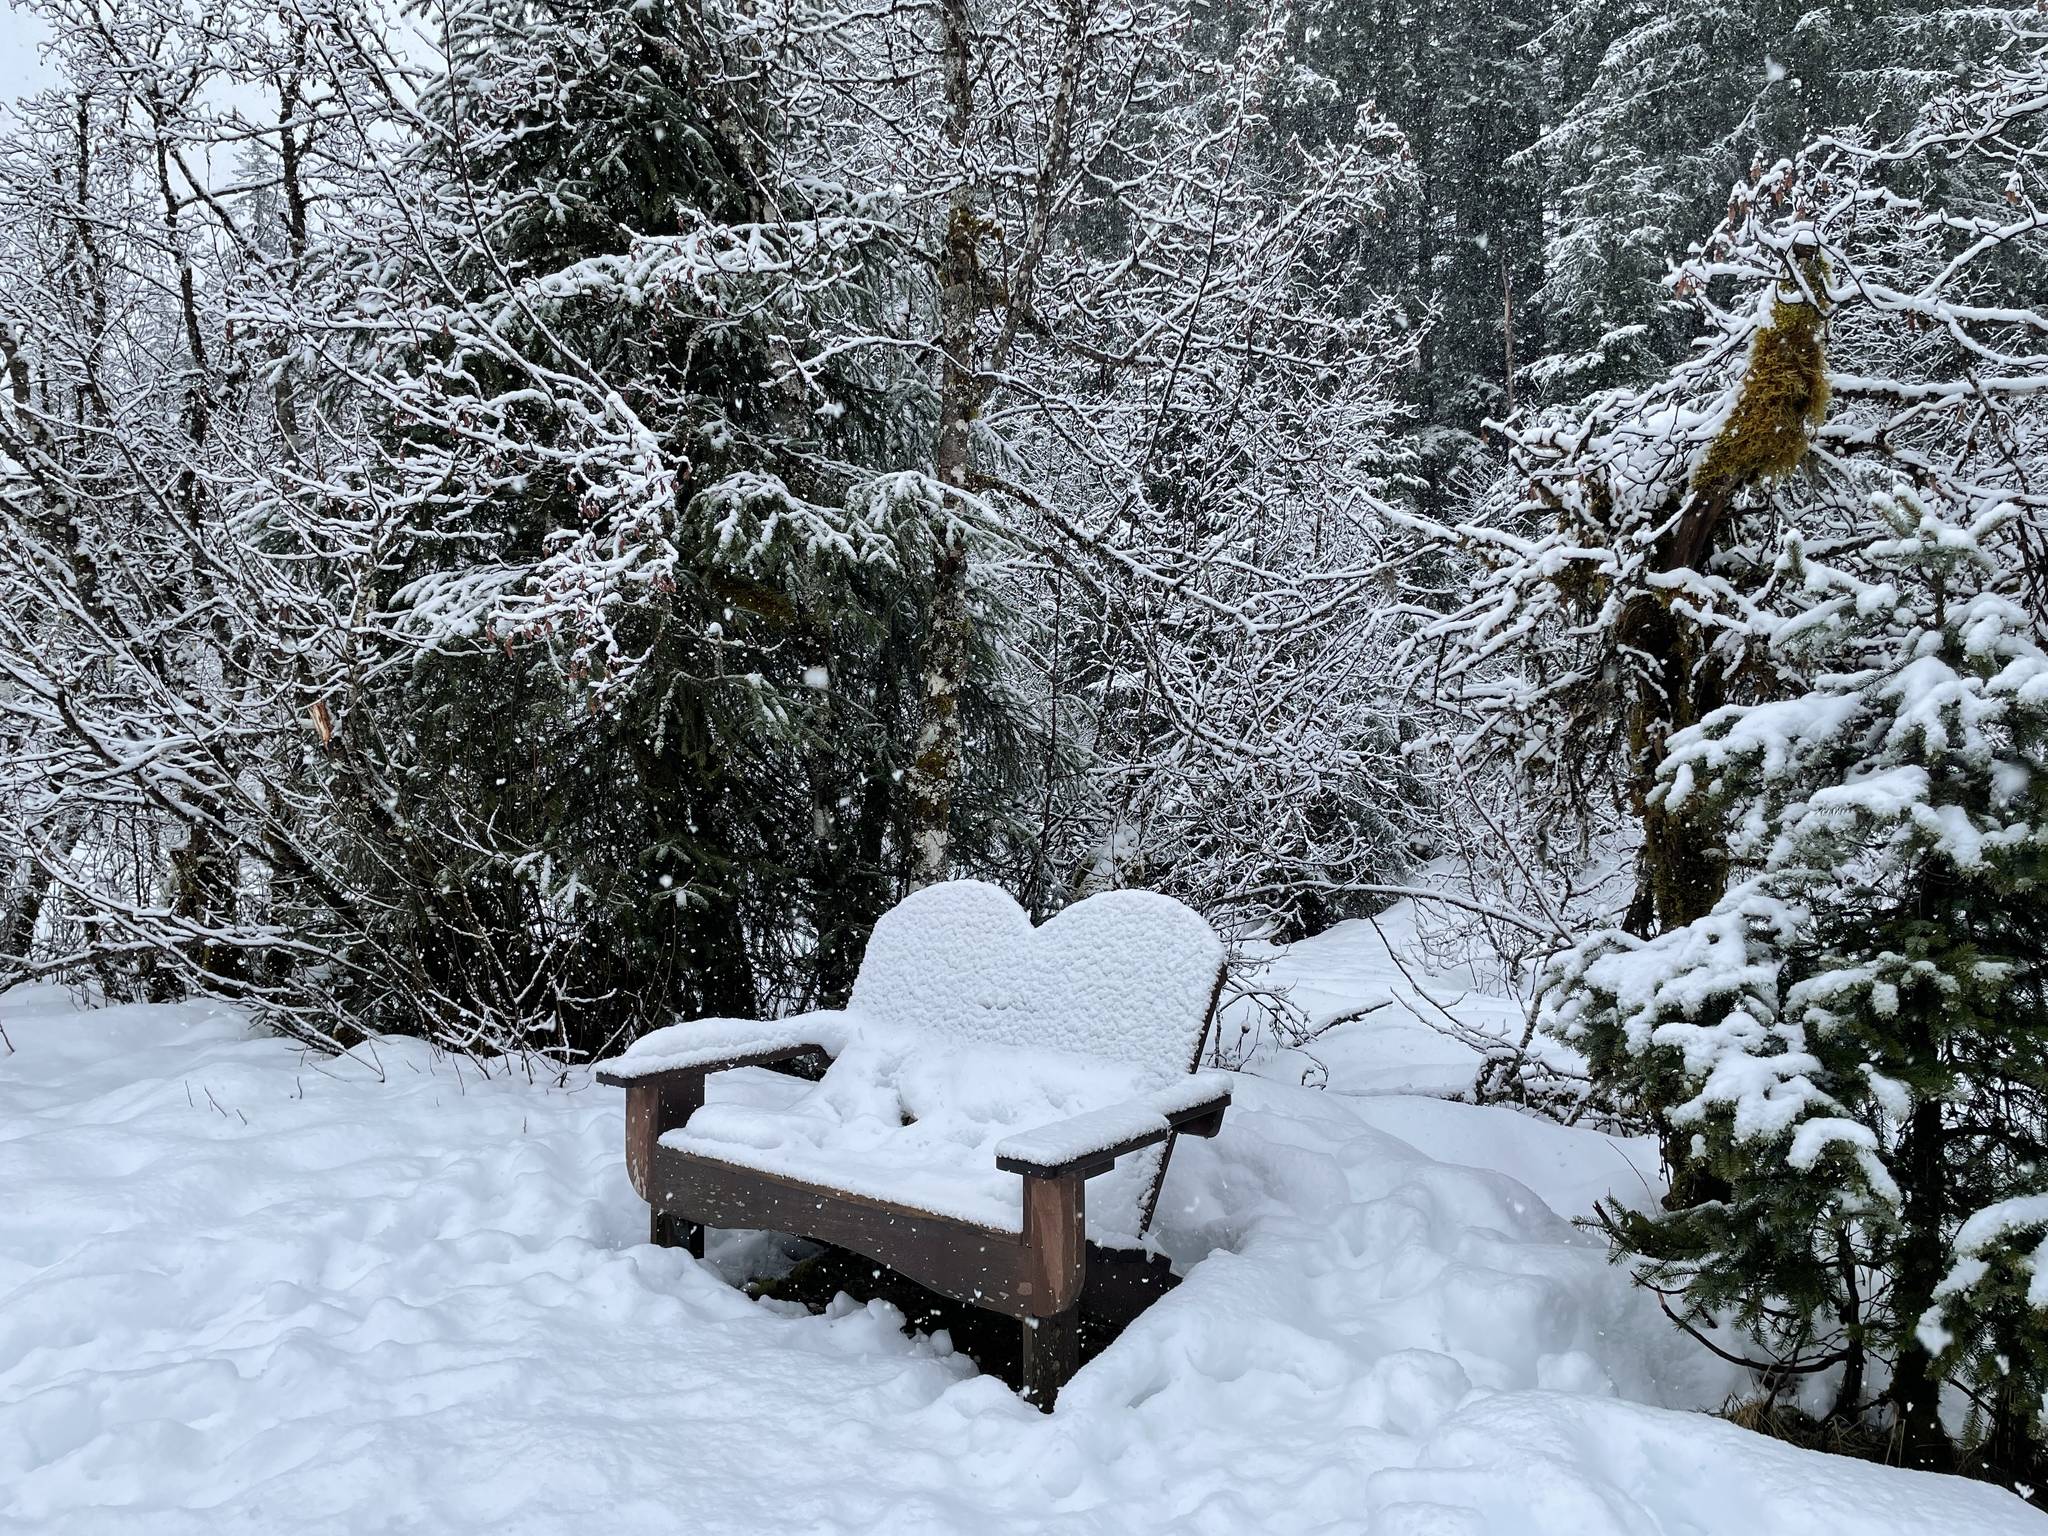 This photo taken on the Dredge Lake trail shows a cozy bench with a soft snow pillow. (Courtesy Photo / Deana Barajas)